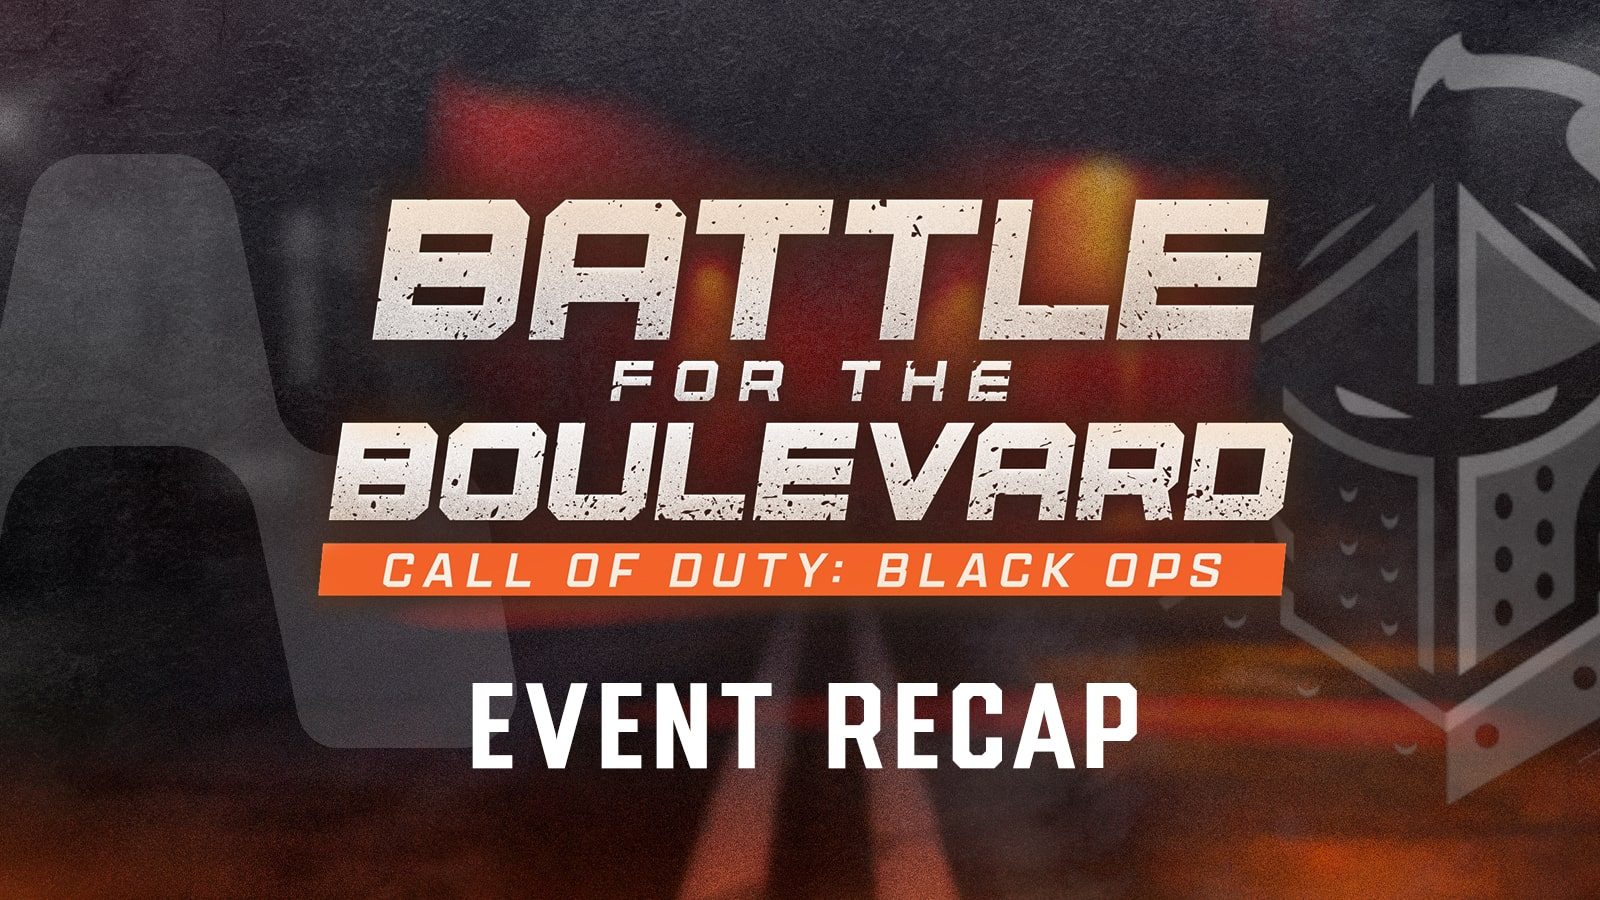 Full Sail Armada Plays Against UCF in Battle for the Boulevard: ‘Call of Duty: Black Ops’ - Hero image